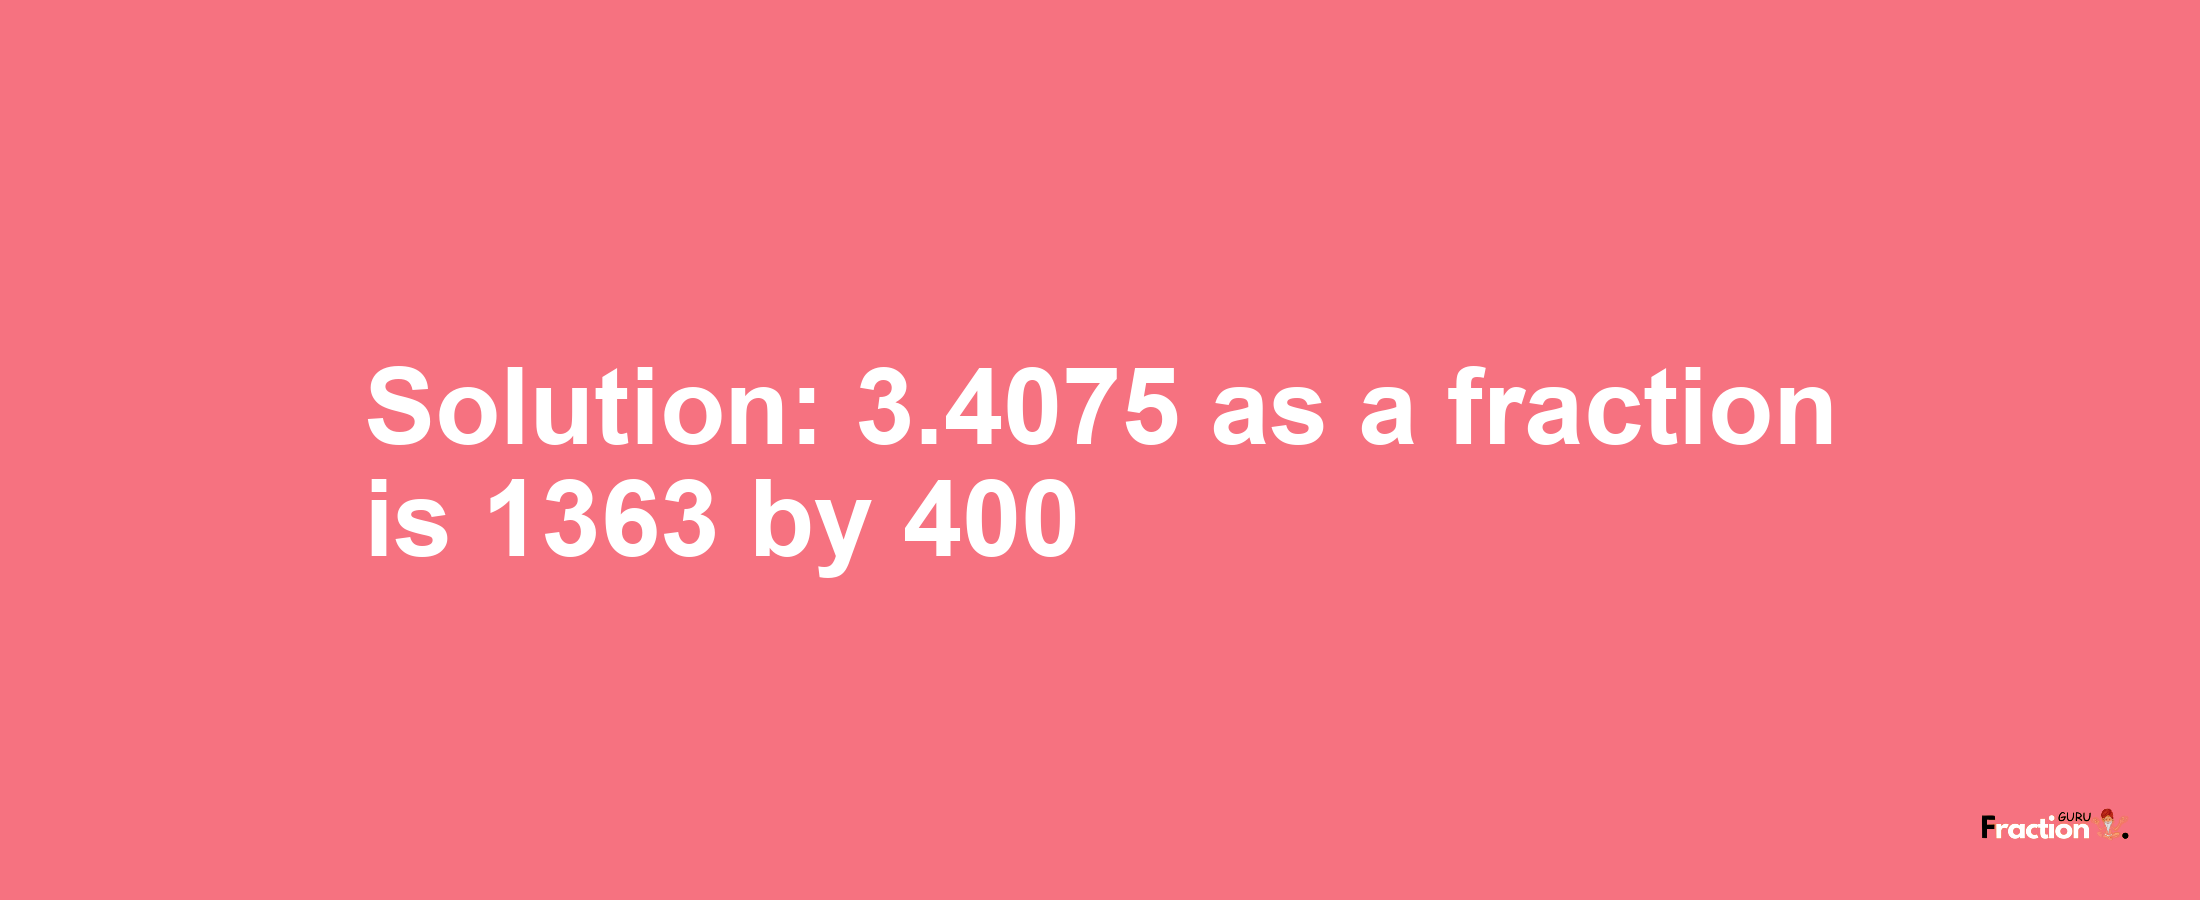 Solution:3.4075 as a fraction is 1363/400